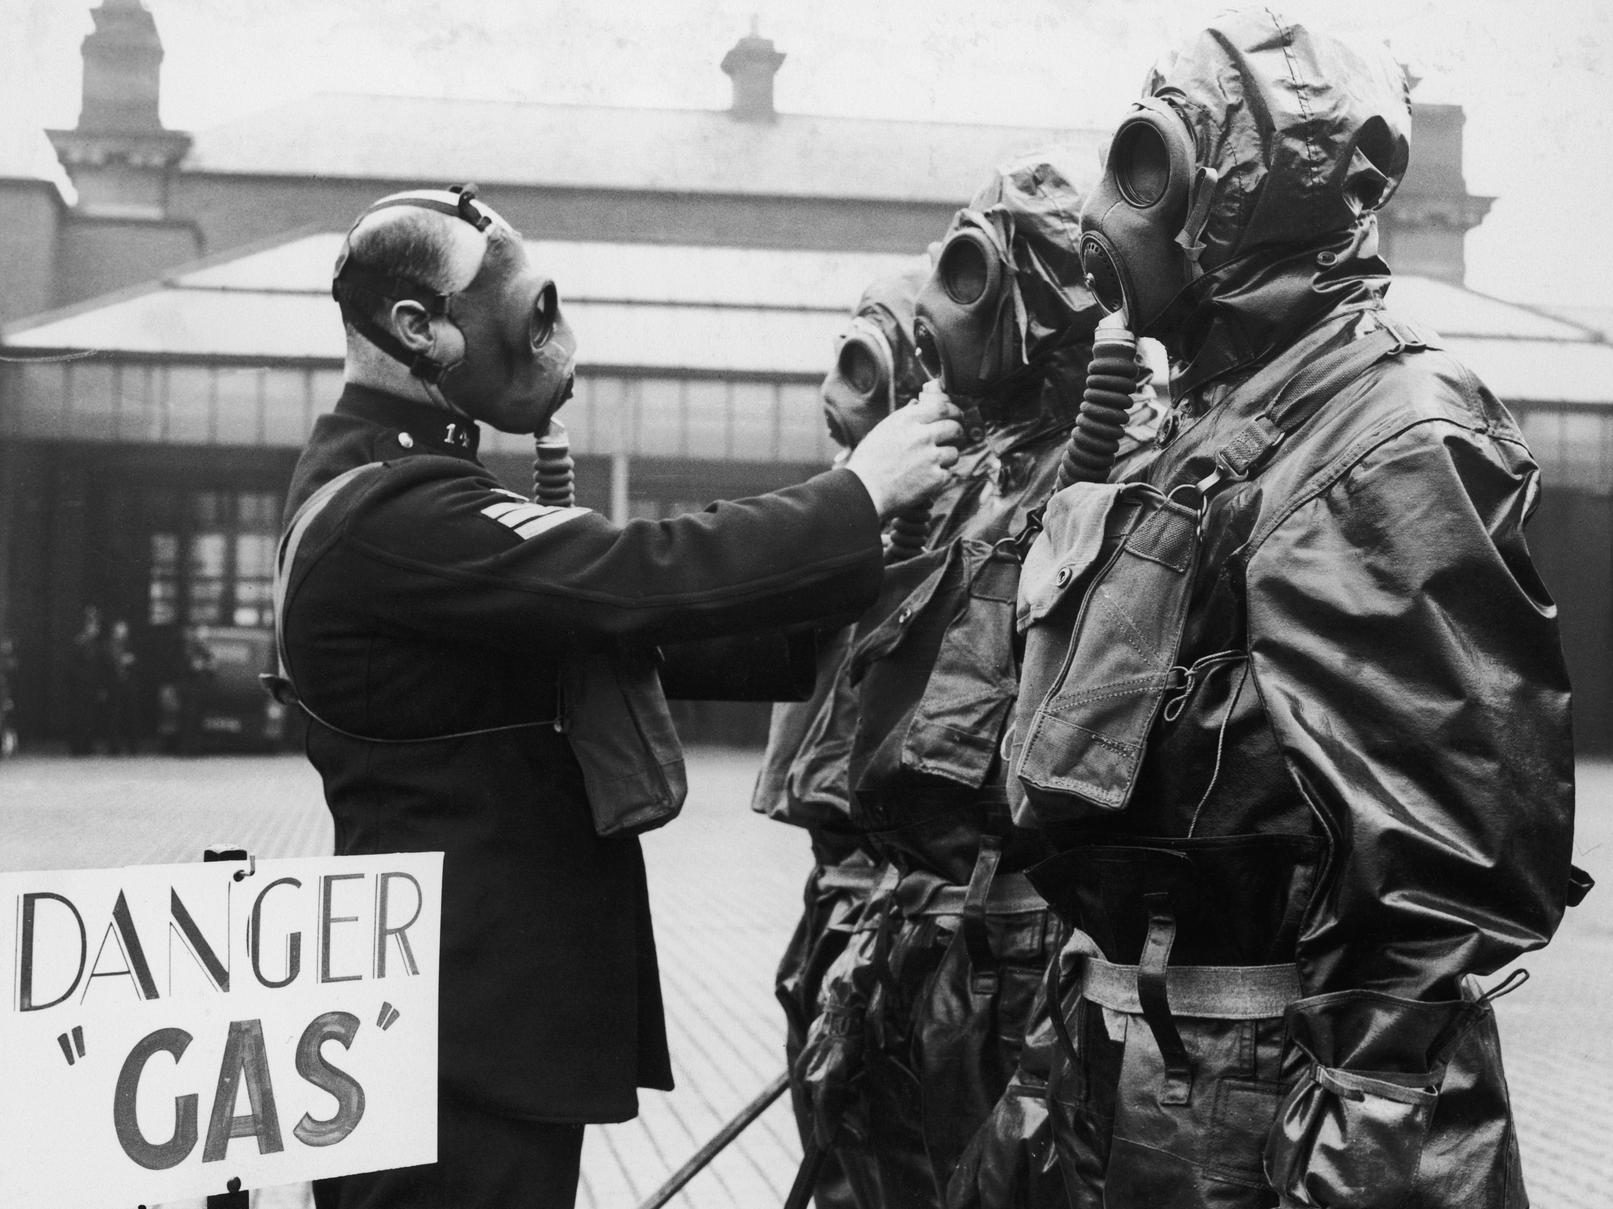 Sgt Taylor adjusting his constables gas mask during a gas drill, in September 1936.